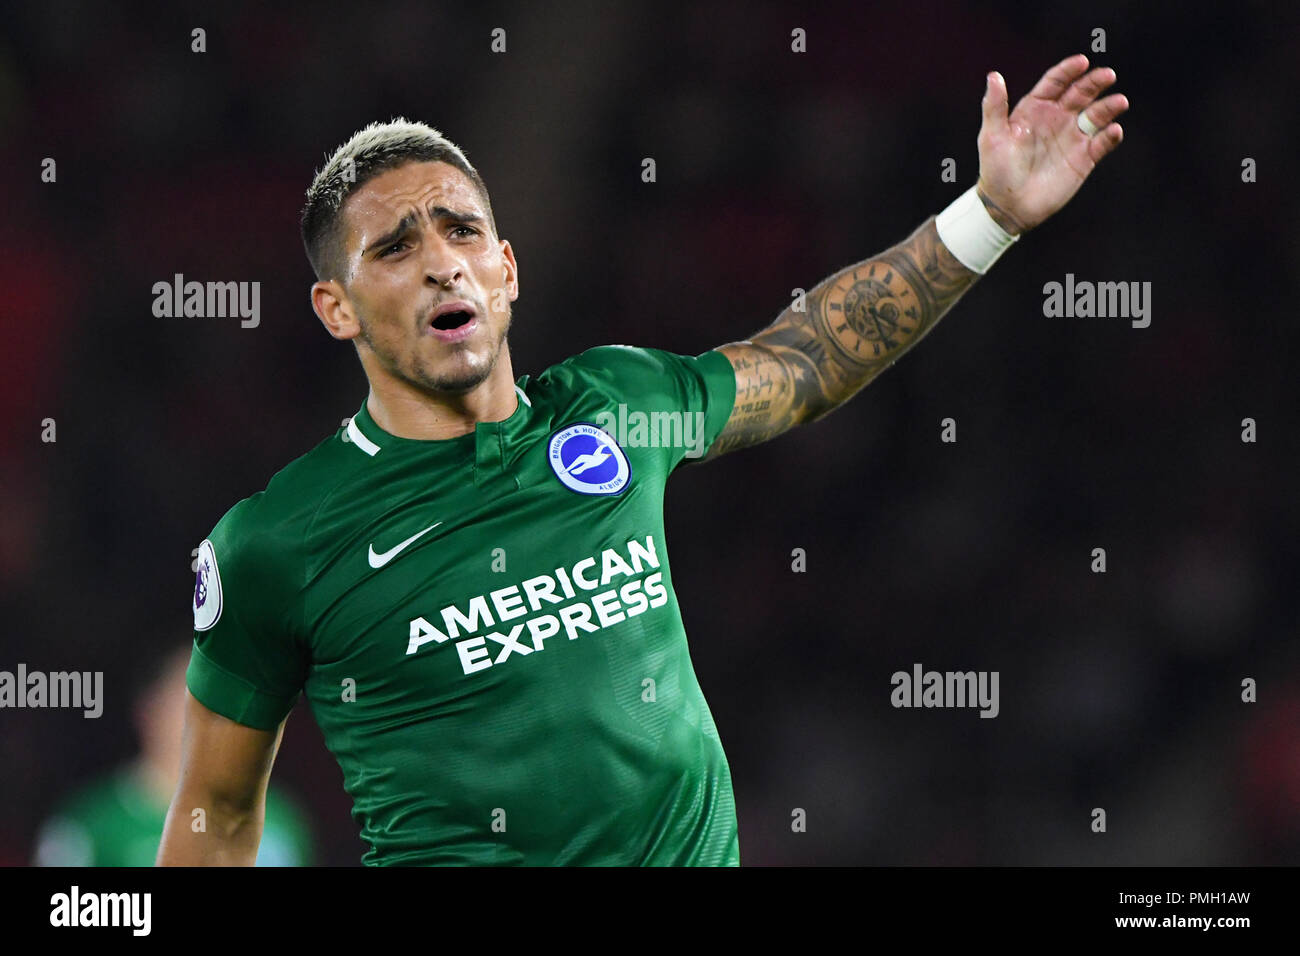 Anthony Knockaert of Brighton & Hove Albion - Southampton v Brighton & Hove Albion, Premier League, St Mary's Stadium, Southampton - 17th September 2018  STRICTLY EDITORIAL USE ONLY - DataCo rules apply - The use of this image in a commercial context is strictly prohibited unless express permission has been given by the club(s) concerned. Examples of commercial usage include, but are not limited to, use in betting and gaming, marketing and advertising products. No use with unauthorised audio, video, data, fixture lists, club and or league logos or services including those listed as 'live' Stock Photo